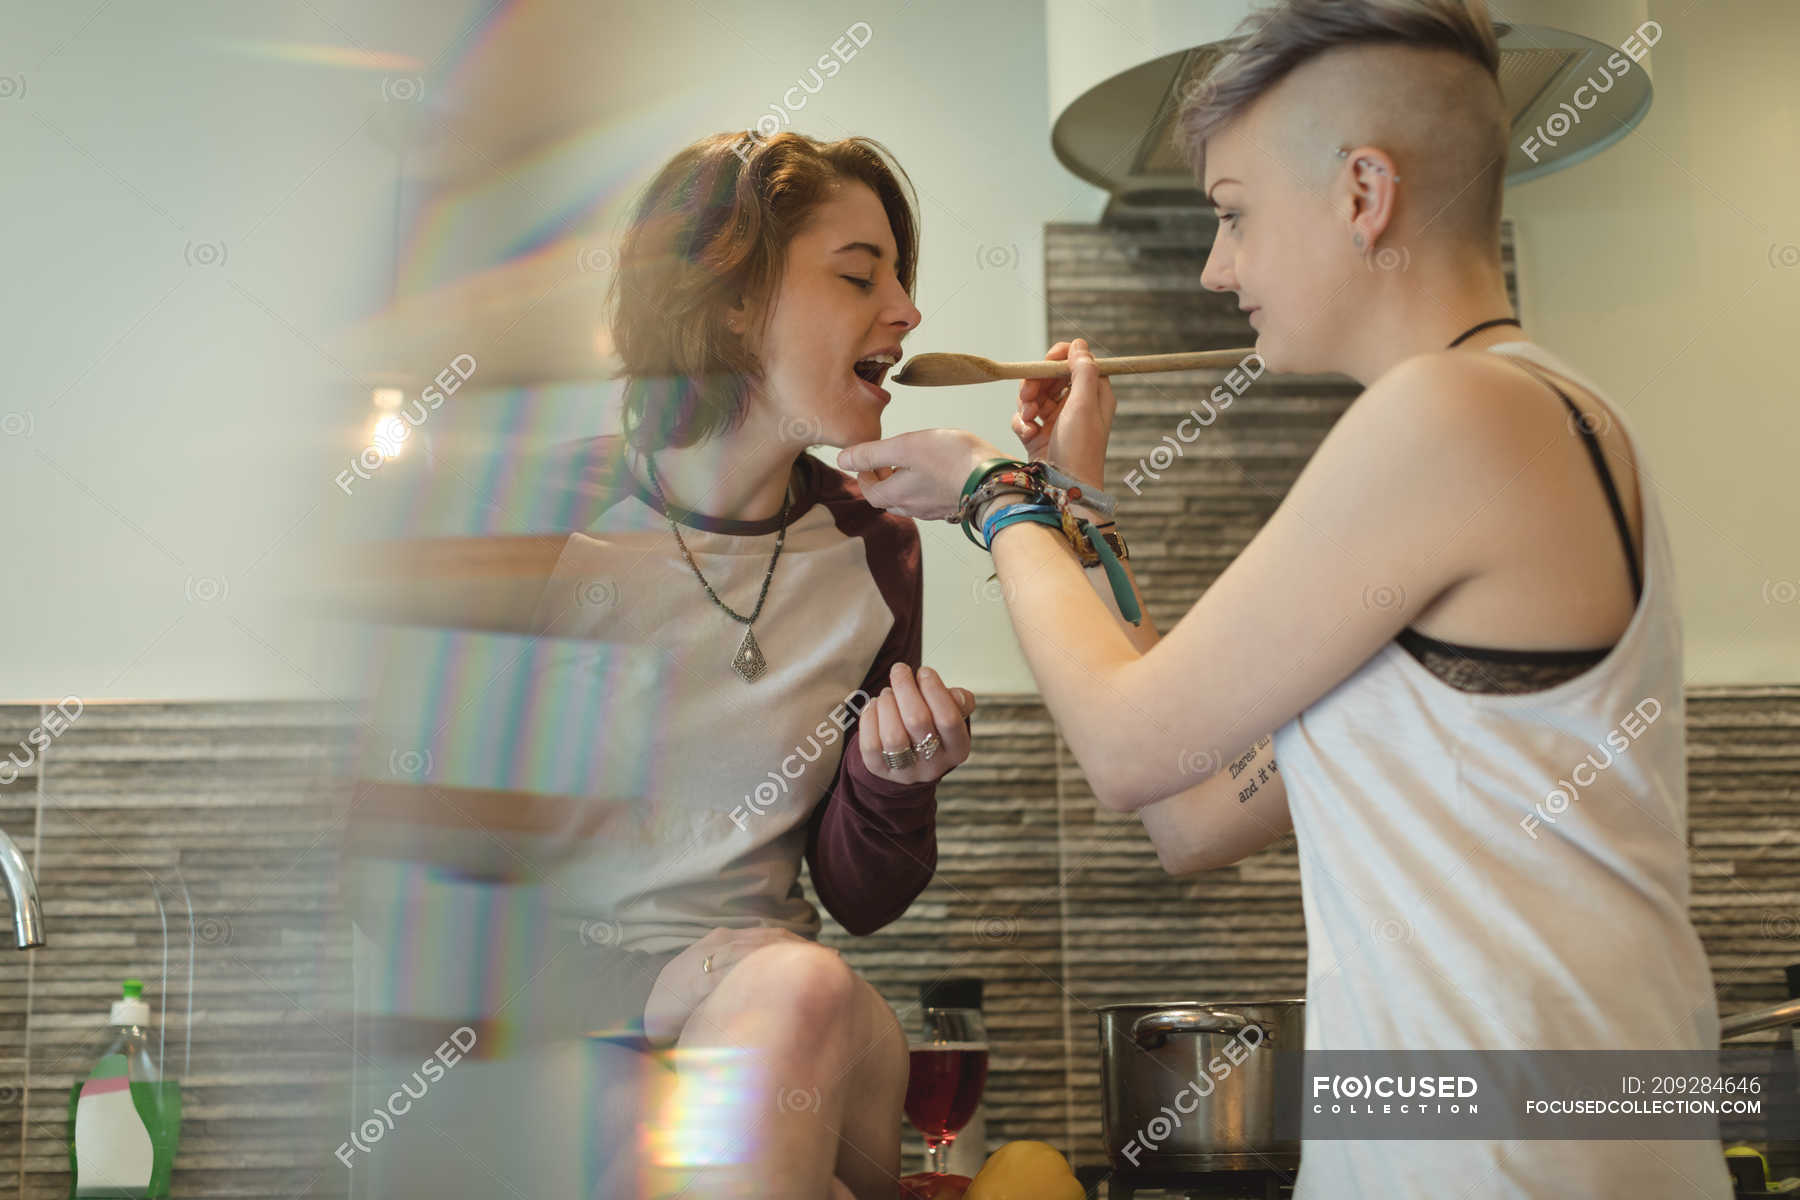 Lesbian Couple Food Tasting In Kitchen At Home Caucasian Ethnicity